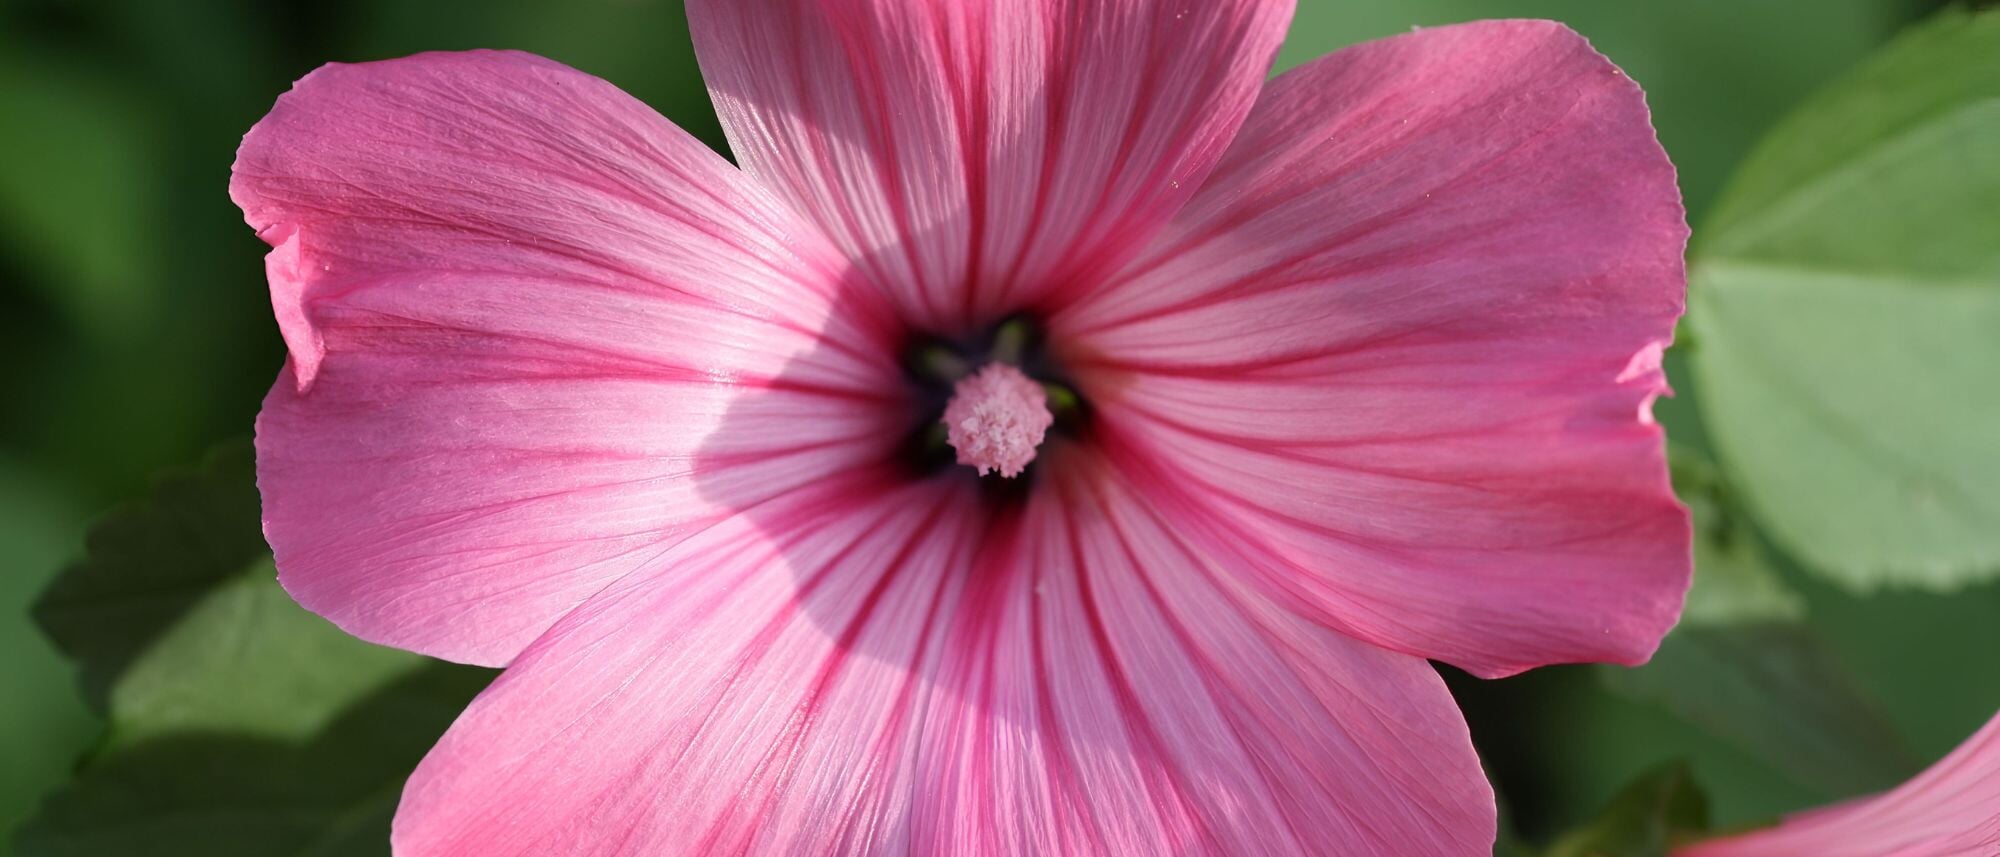 Pink large hibiscus rose mallow flower in the garden